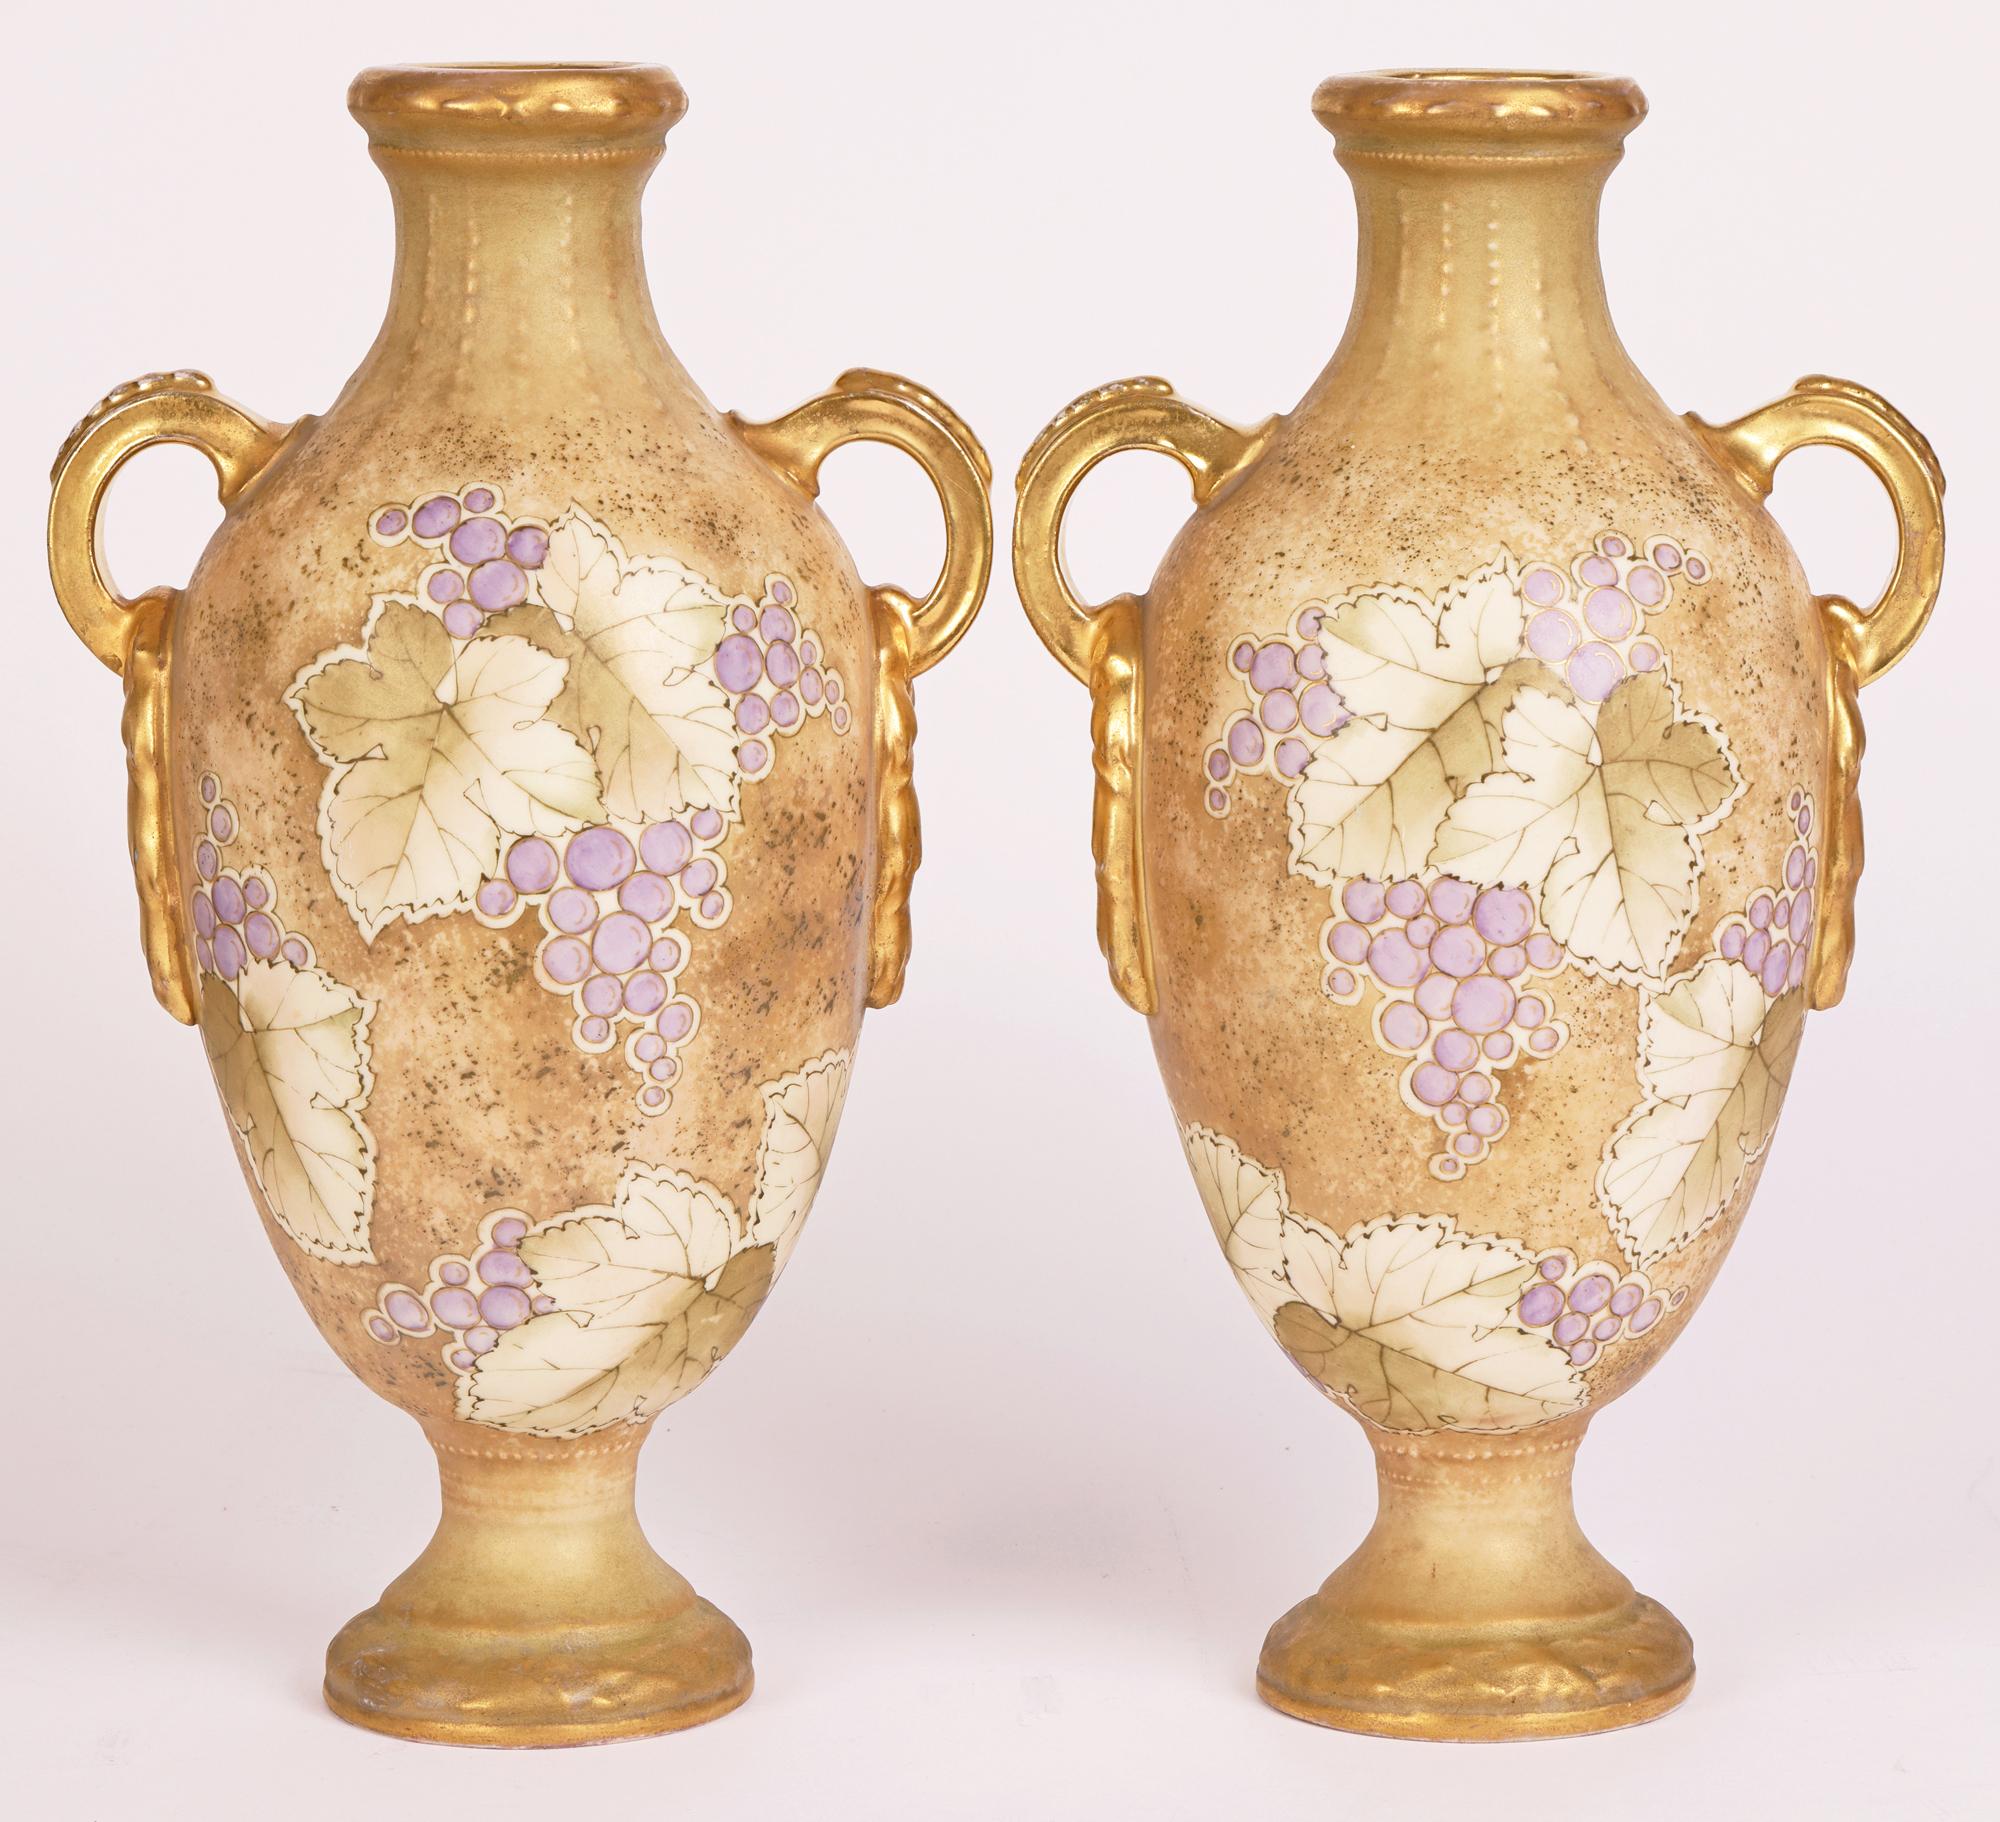 Turn Teplitz RSK Amphora Pair Art Nouveau Hand-Painted Twin Handled Vases For Sale 12